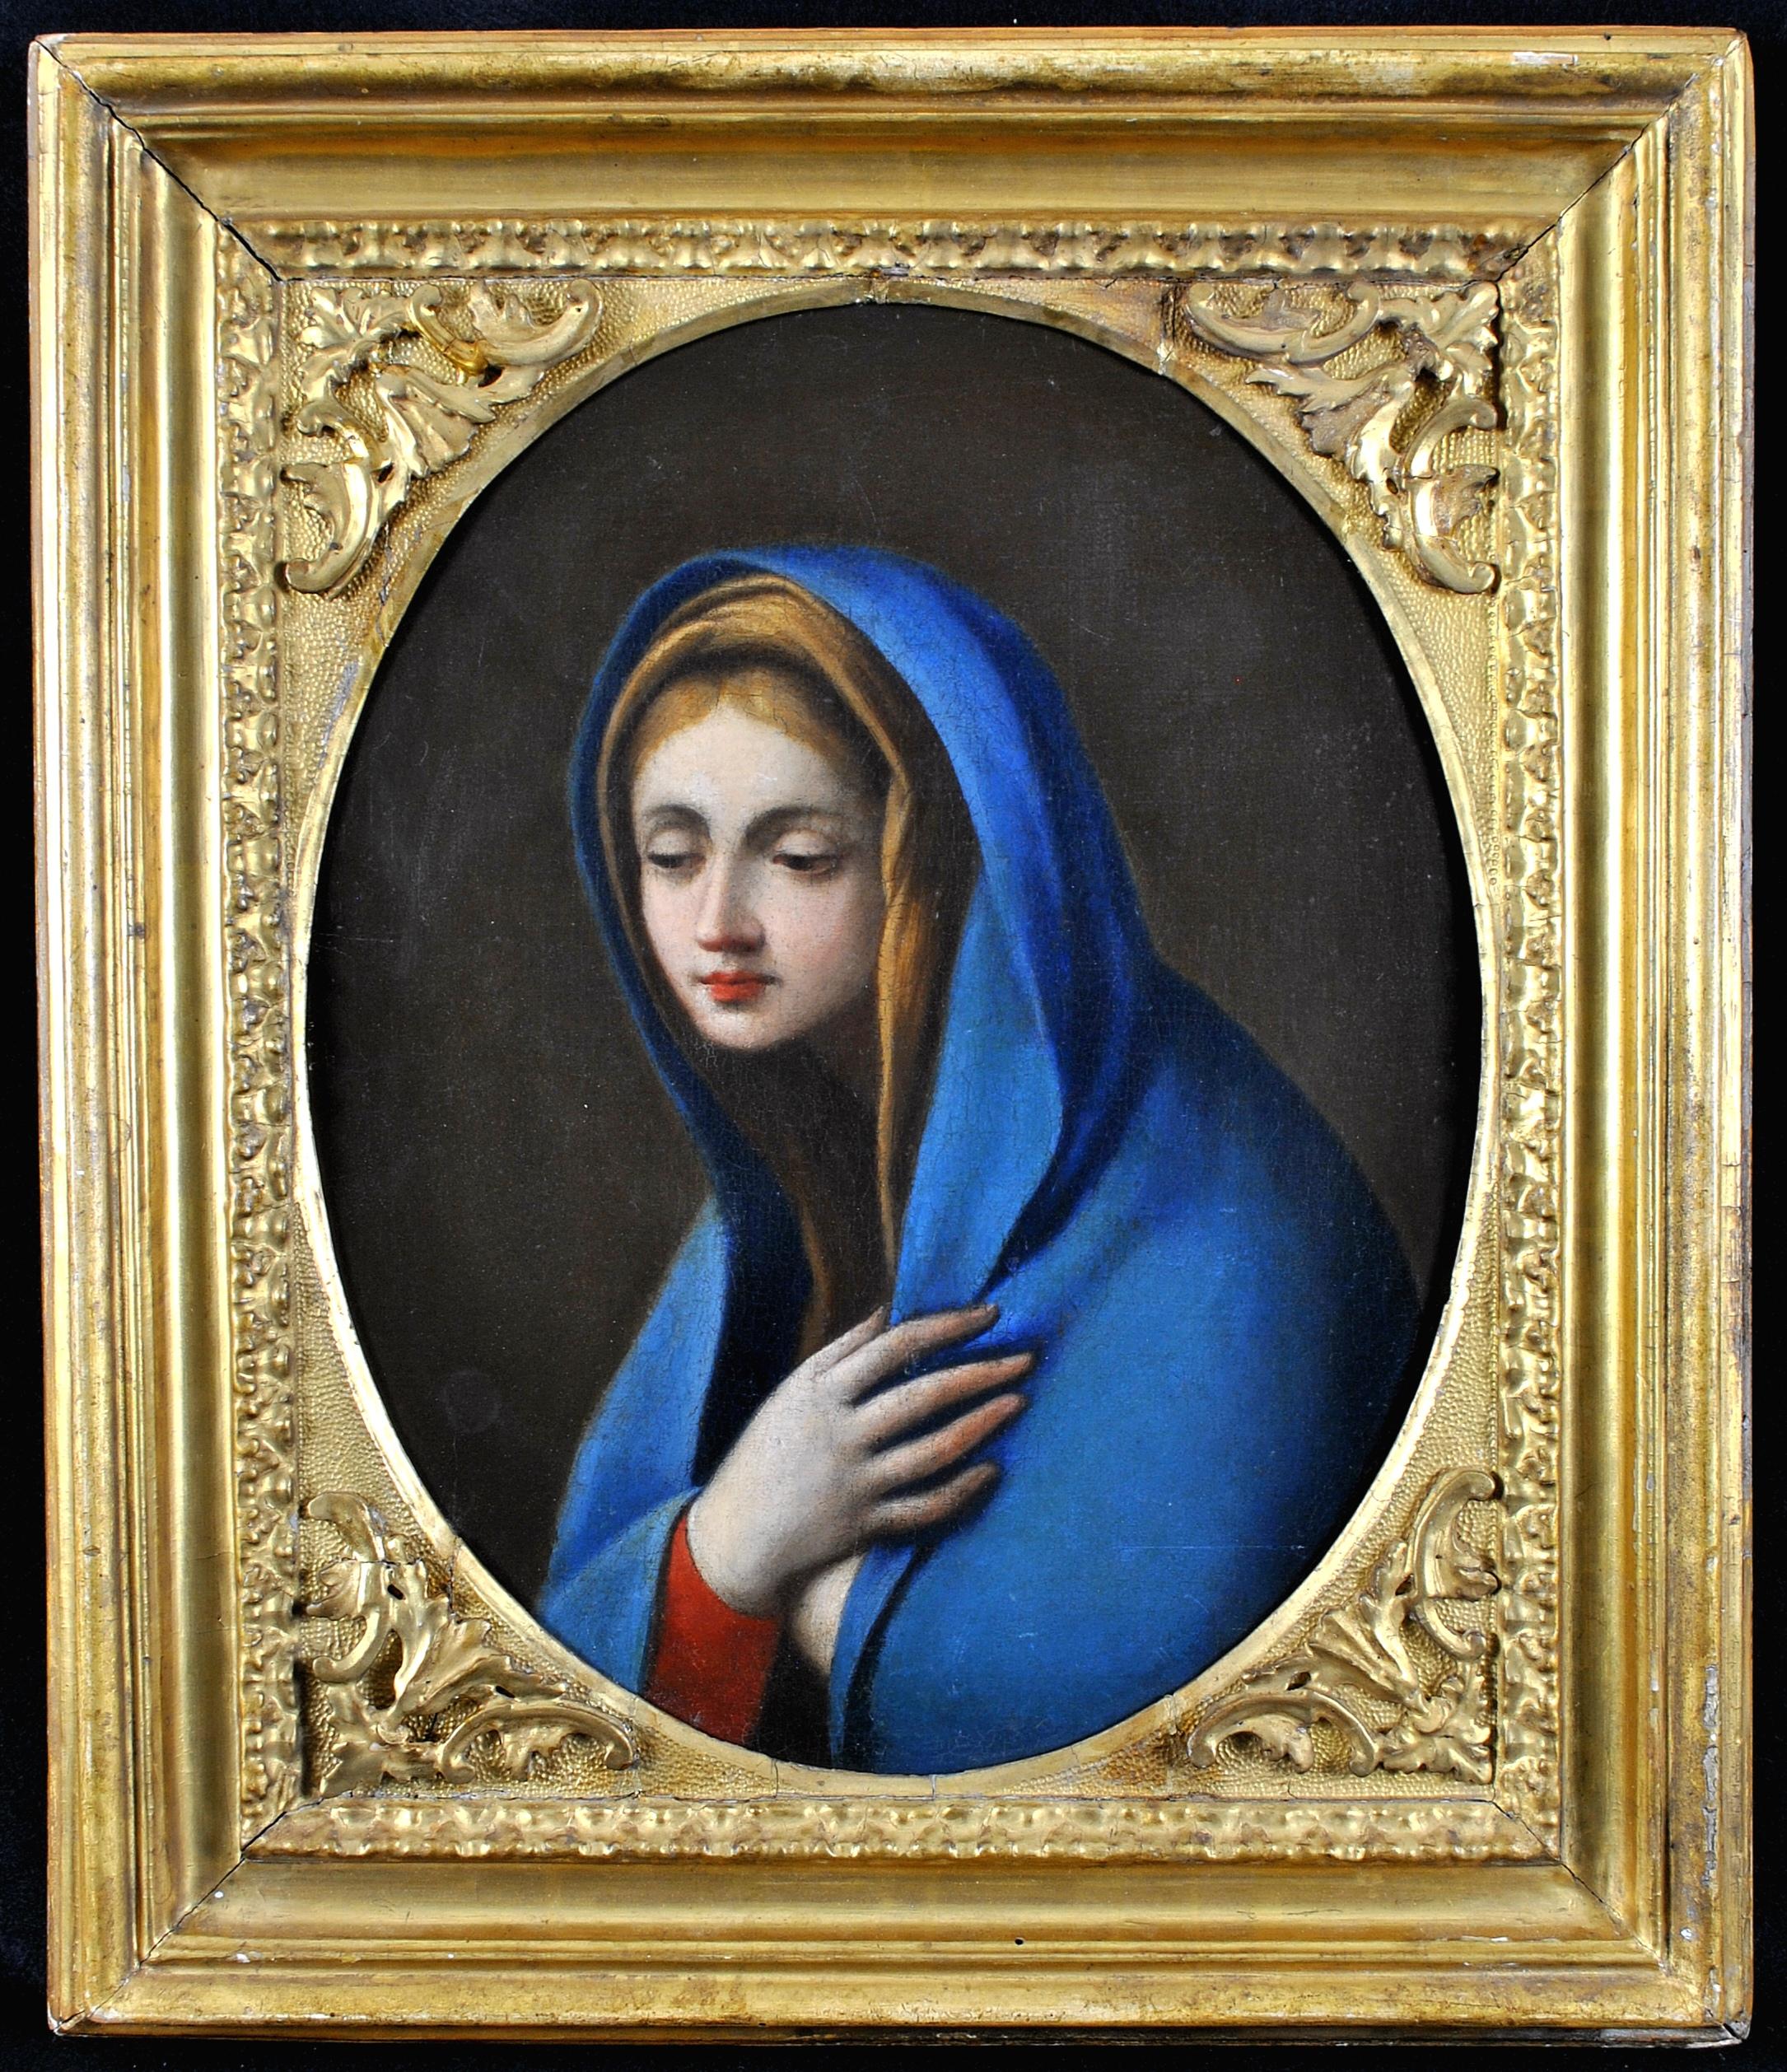 The Virgin in Adoration - 17th Century Italian Old Master Religious Oil Painting